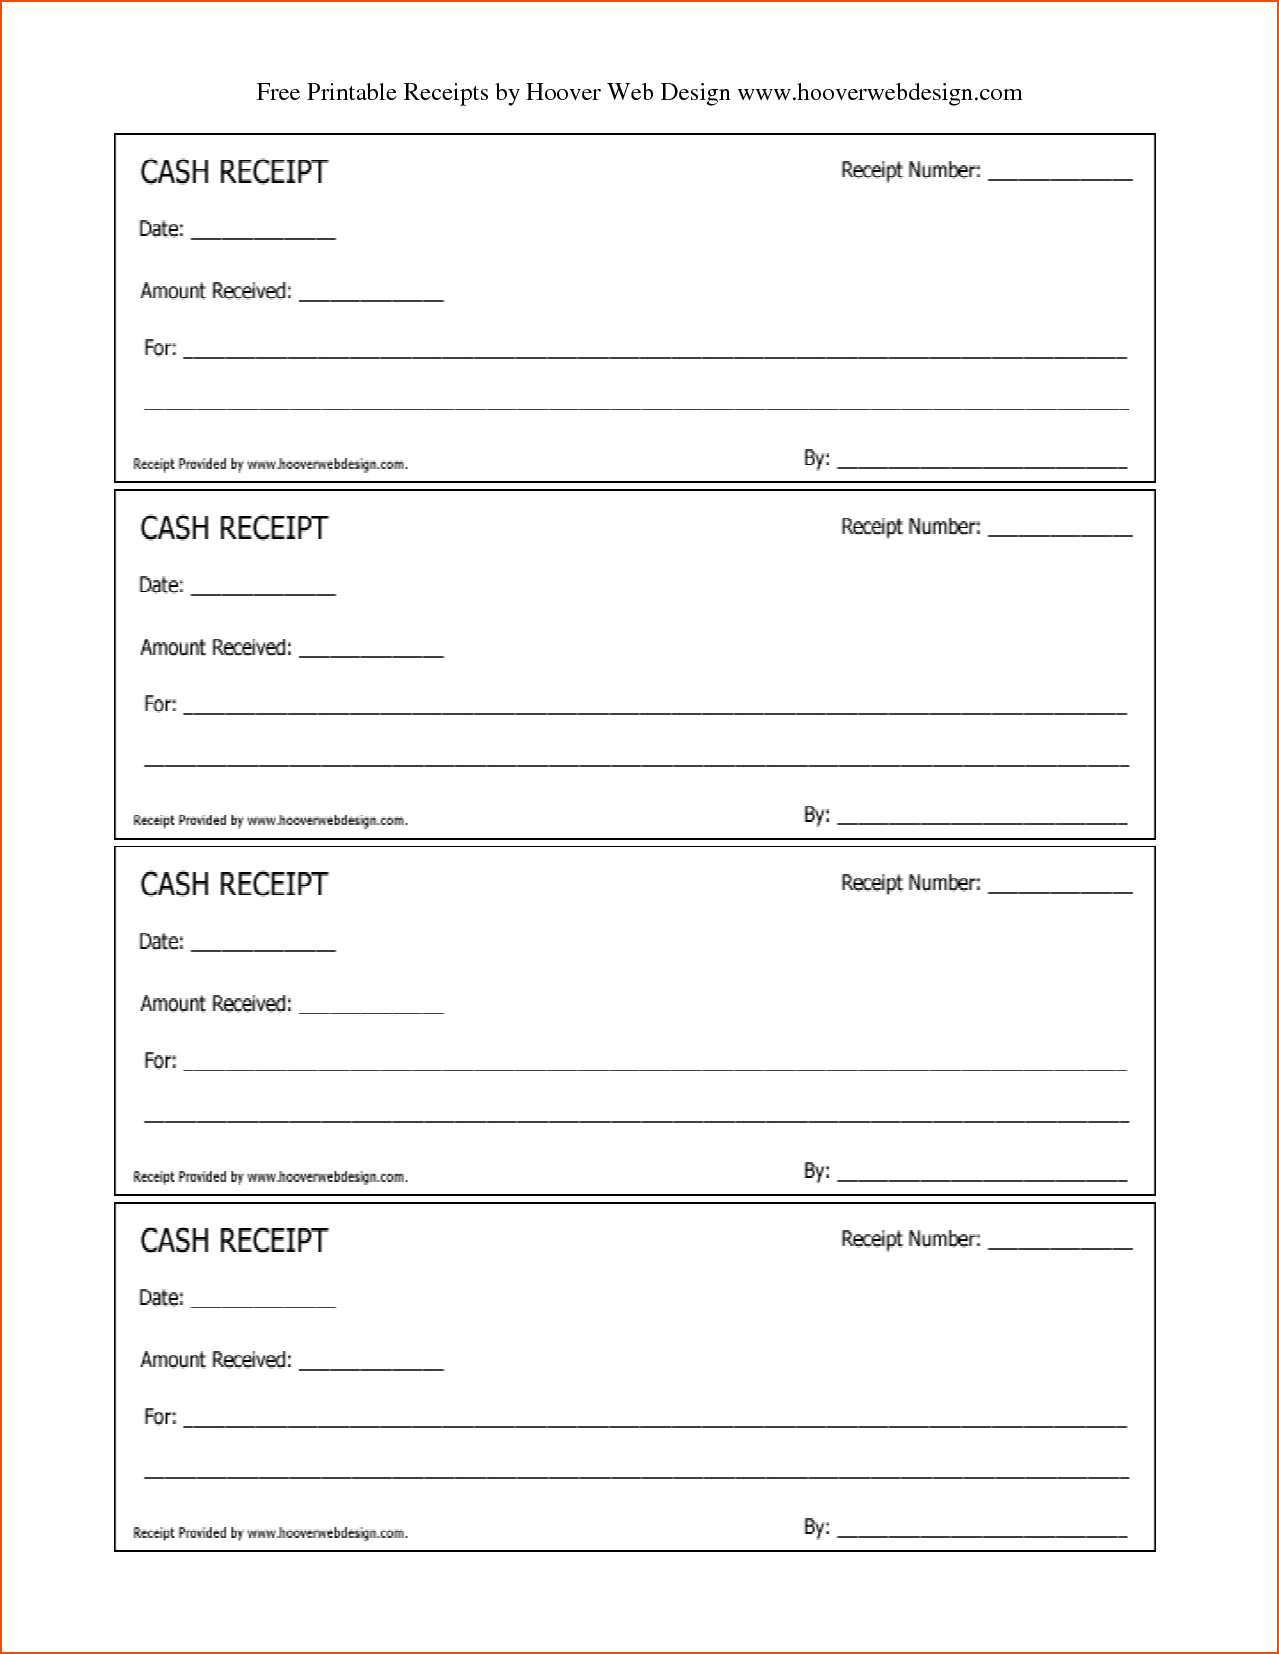 Receipt for Services Template Free Printable Receipts for Services Feedback Templates